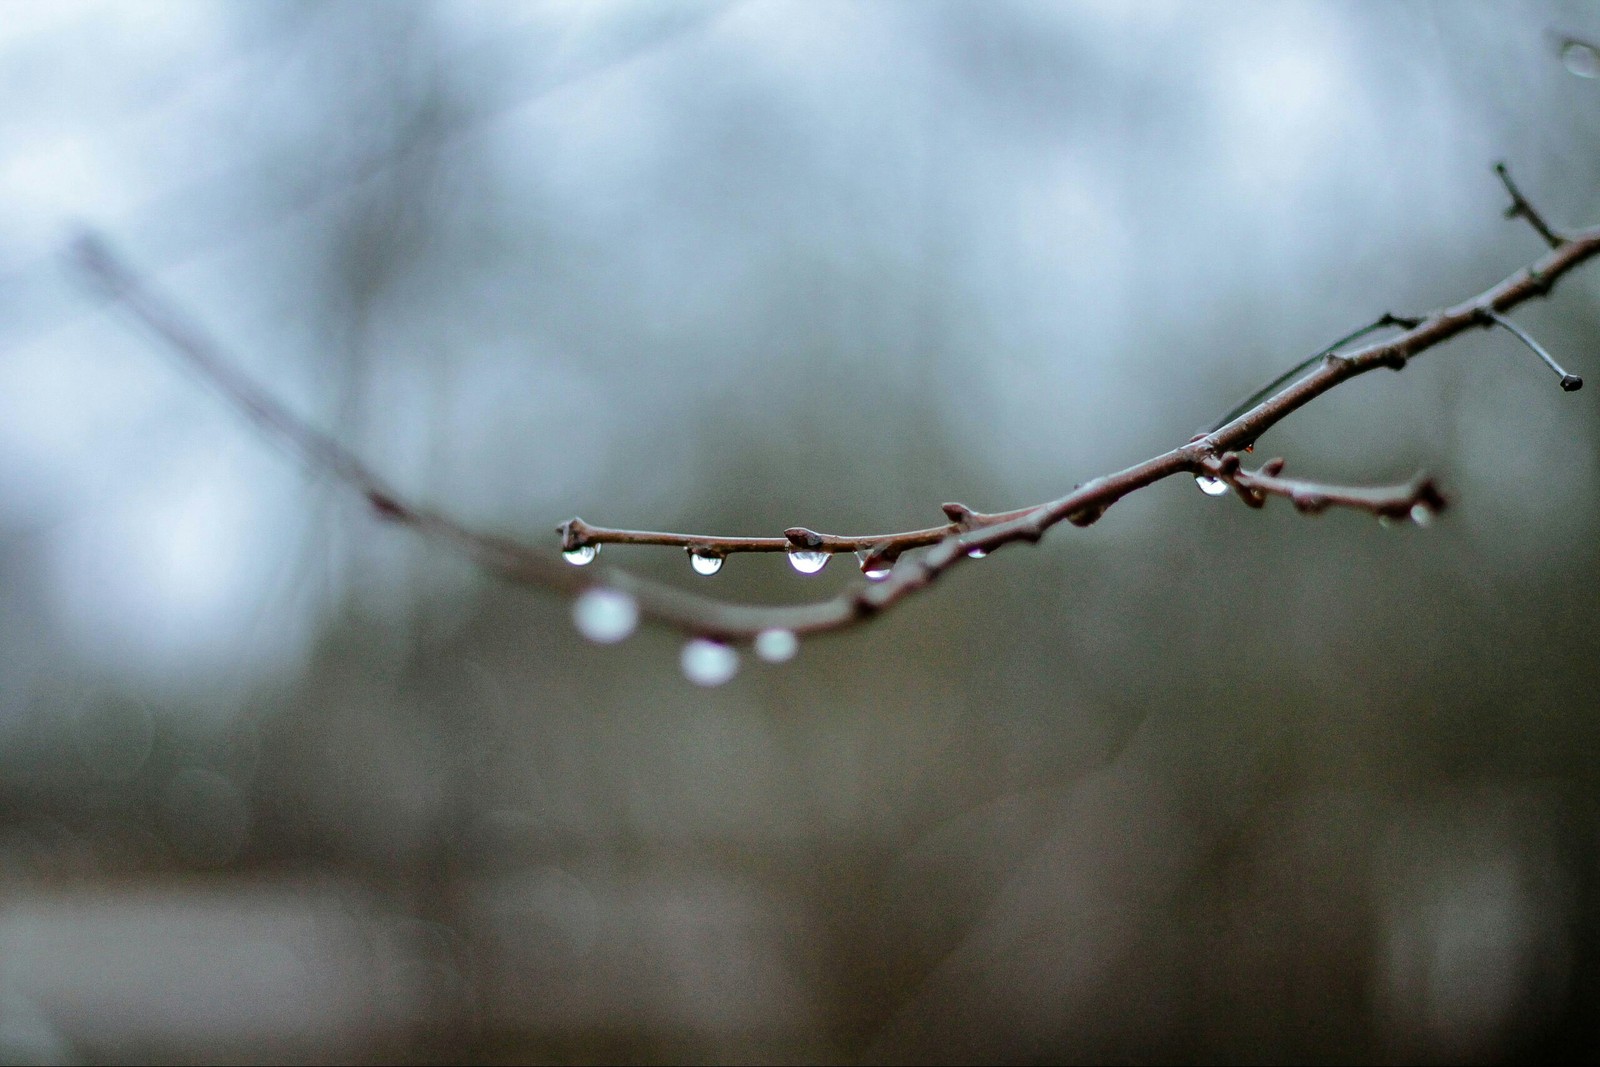 Pskov. - My, Forest, January, The photo, Nature, Canon 1100d, 50mm, Longpost